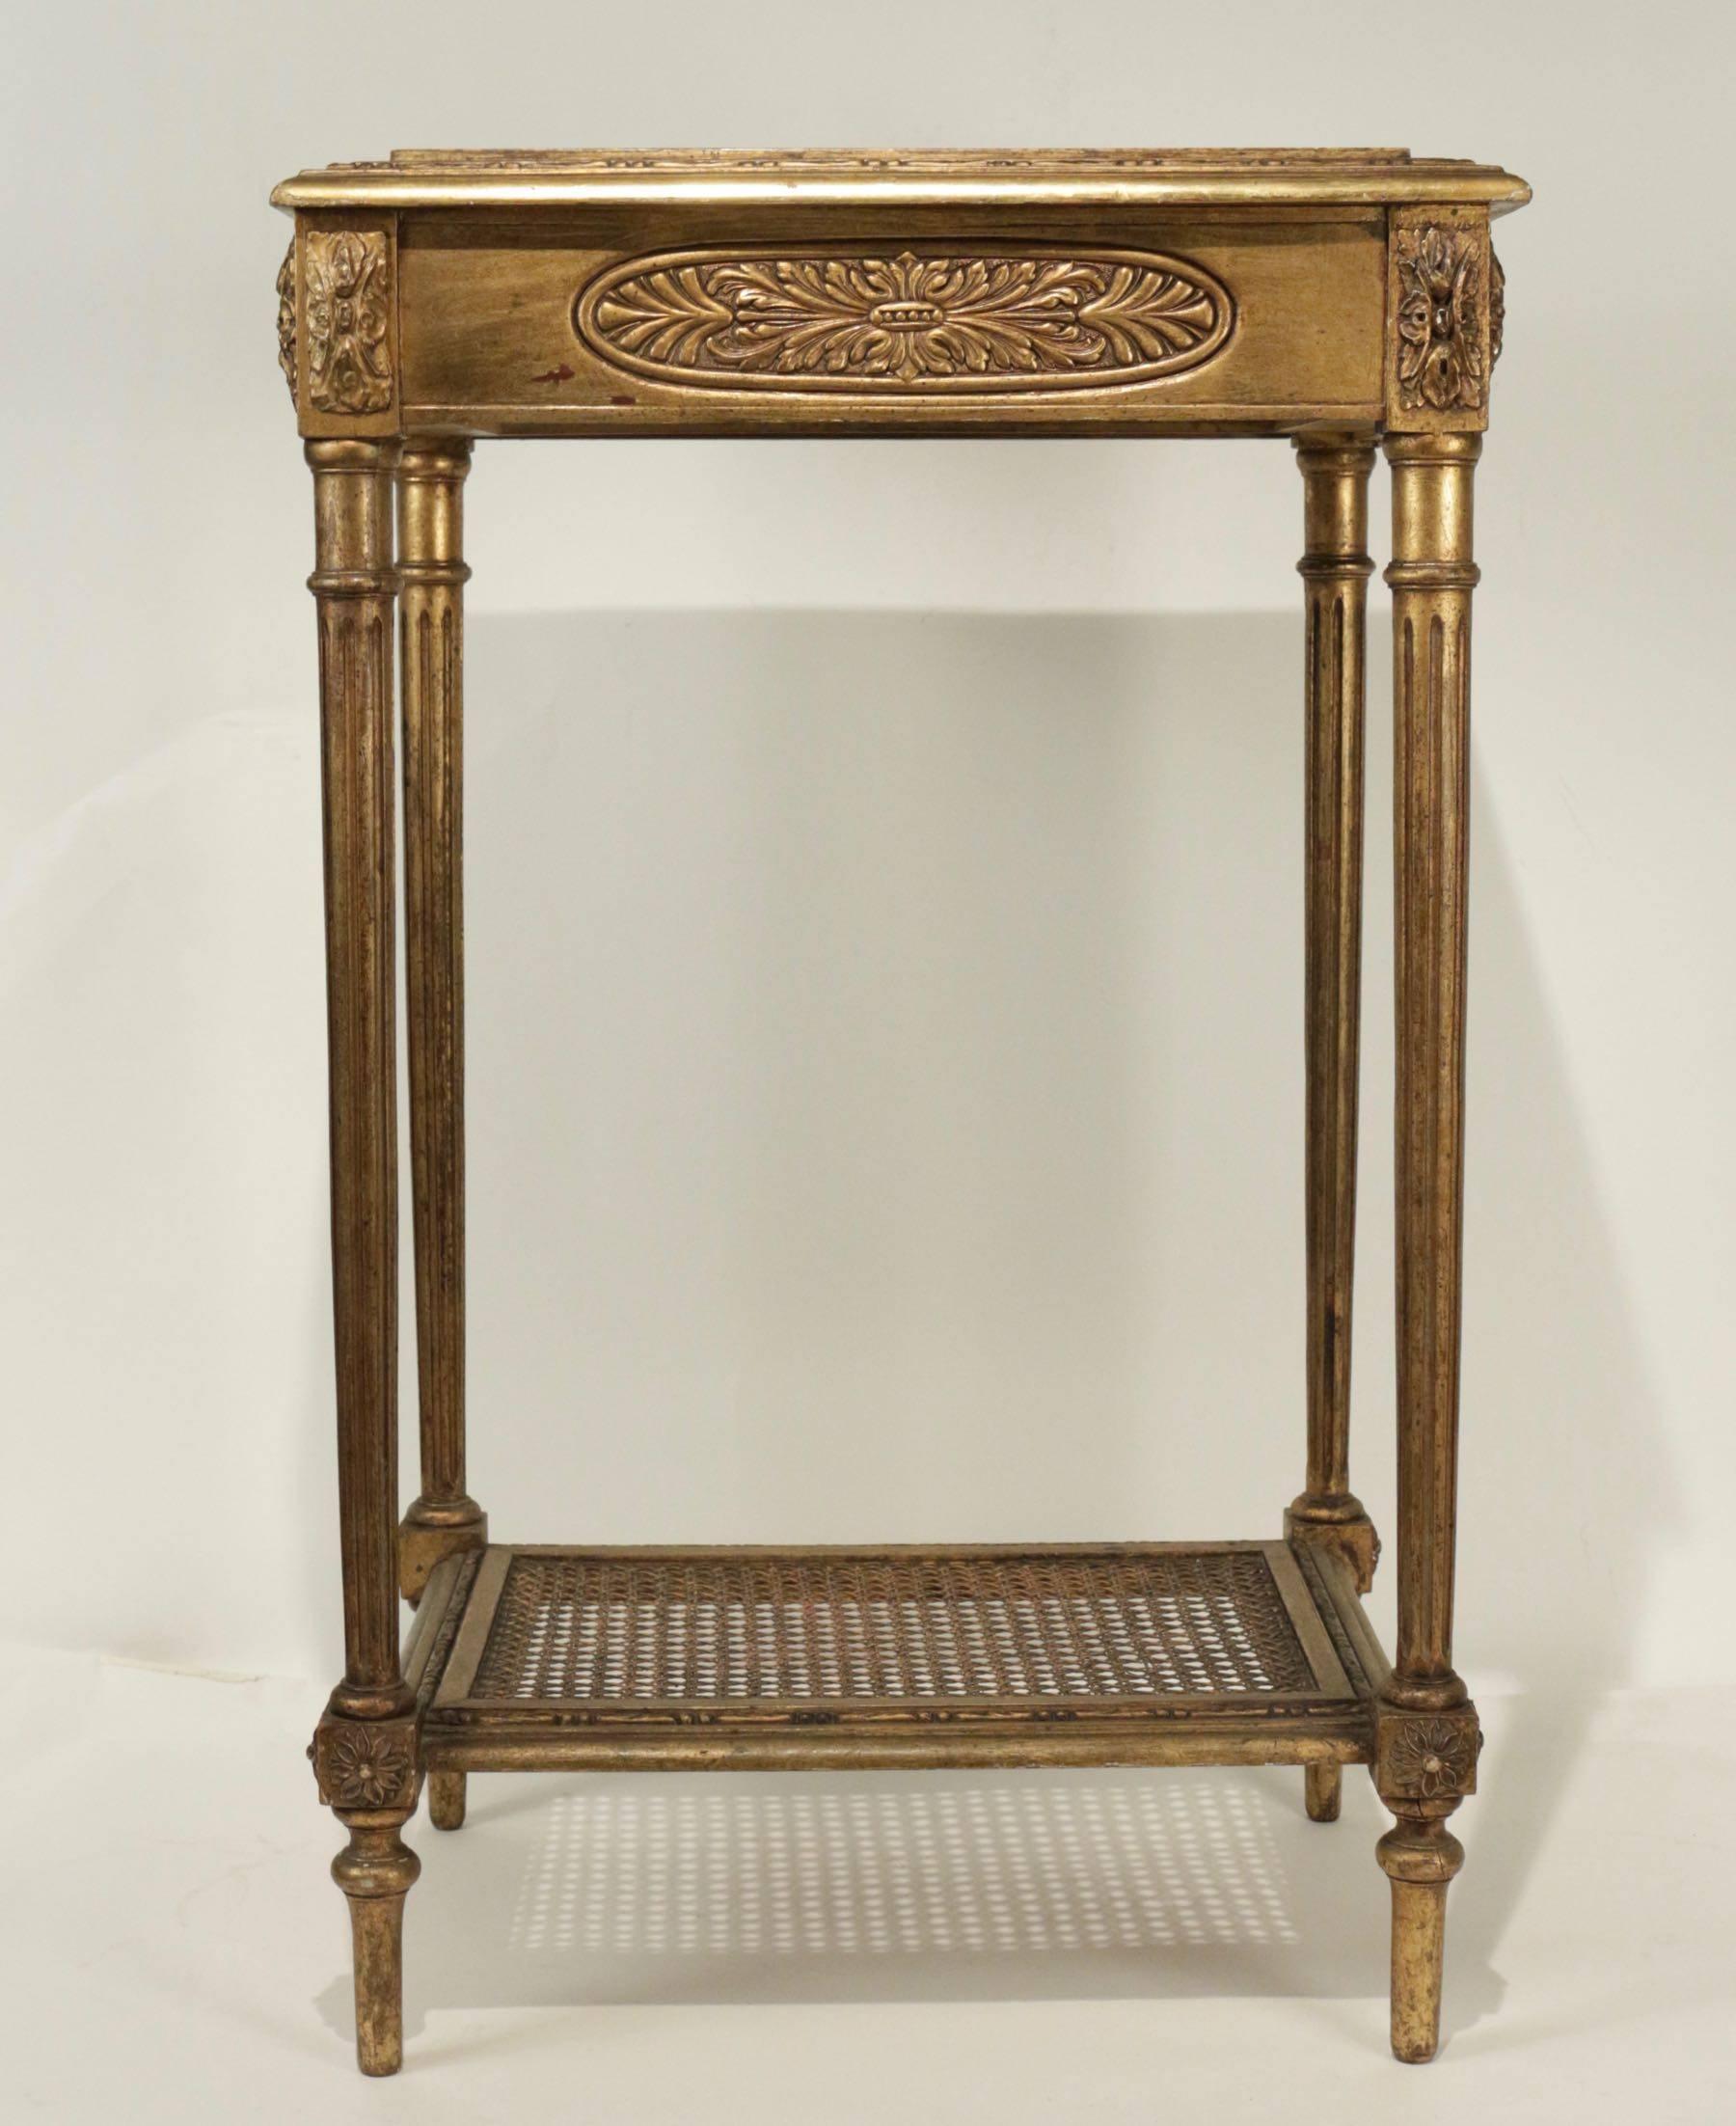 20th Century Elegant Console with a Centre Drawer in the Style of Louis XVI